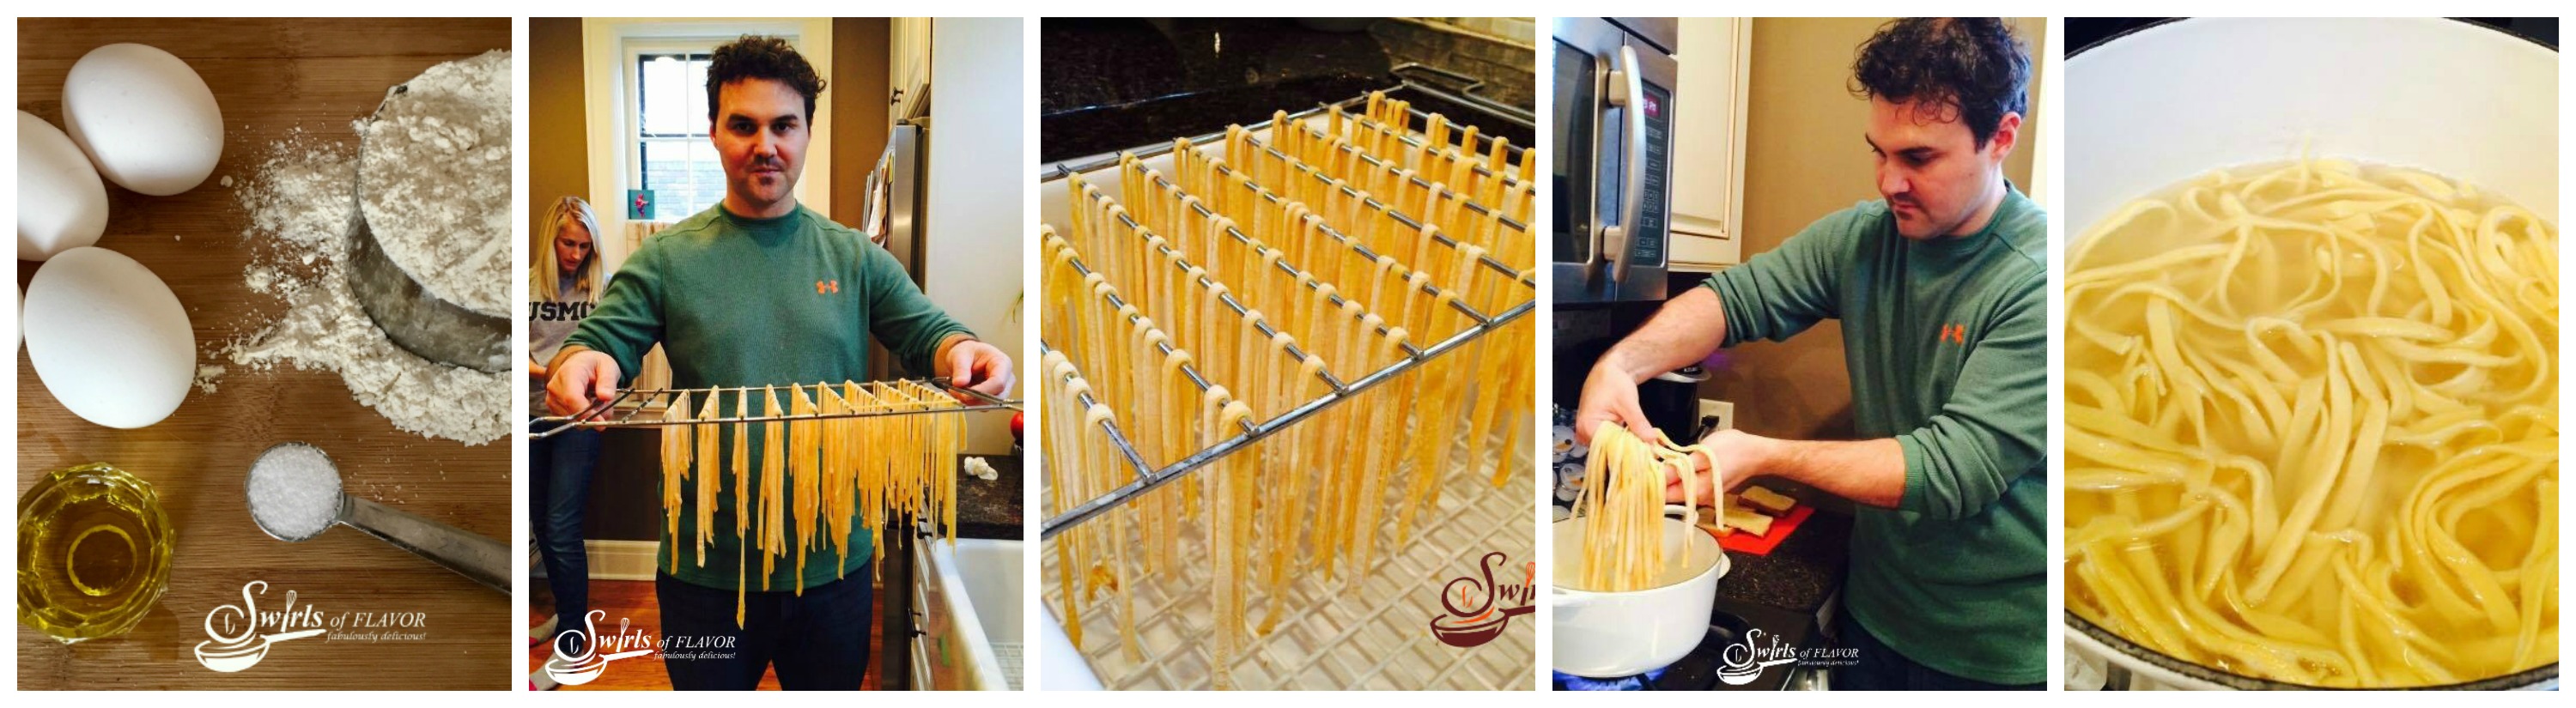 Make delicious memories with this Homemade Pasta recipe! Just 4 ingredients! pasta | homemade | homemade pasta | pasta machine | fettuccine | fun with kids | family traditions